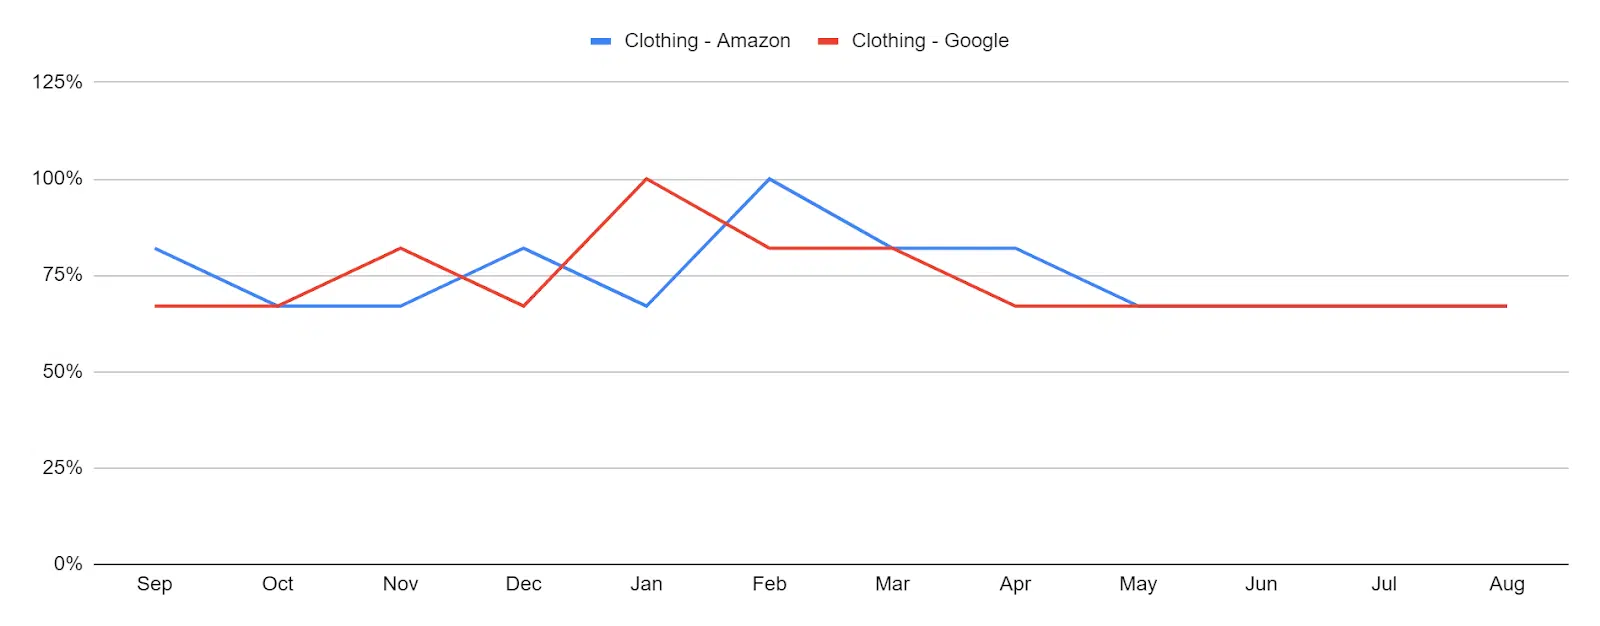 gym or athletic wear - tangential search trends